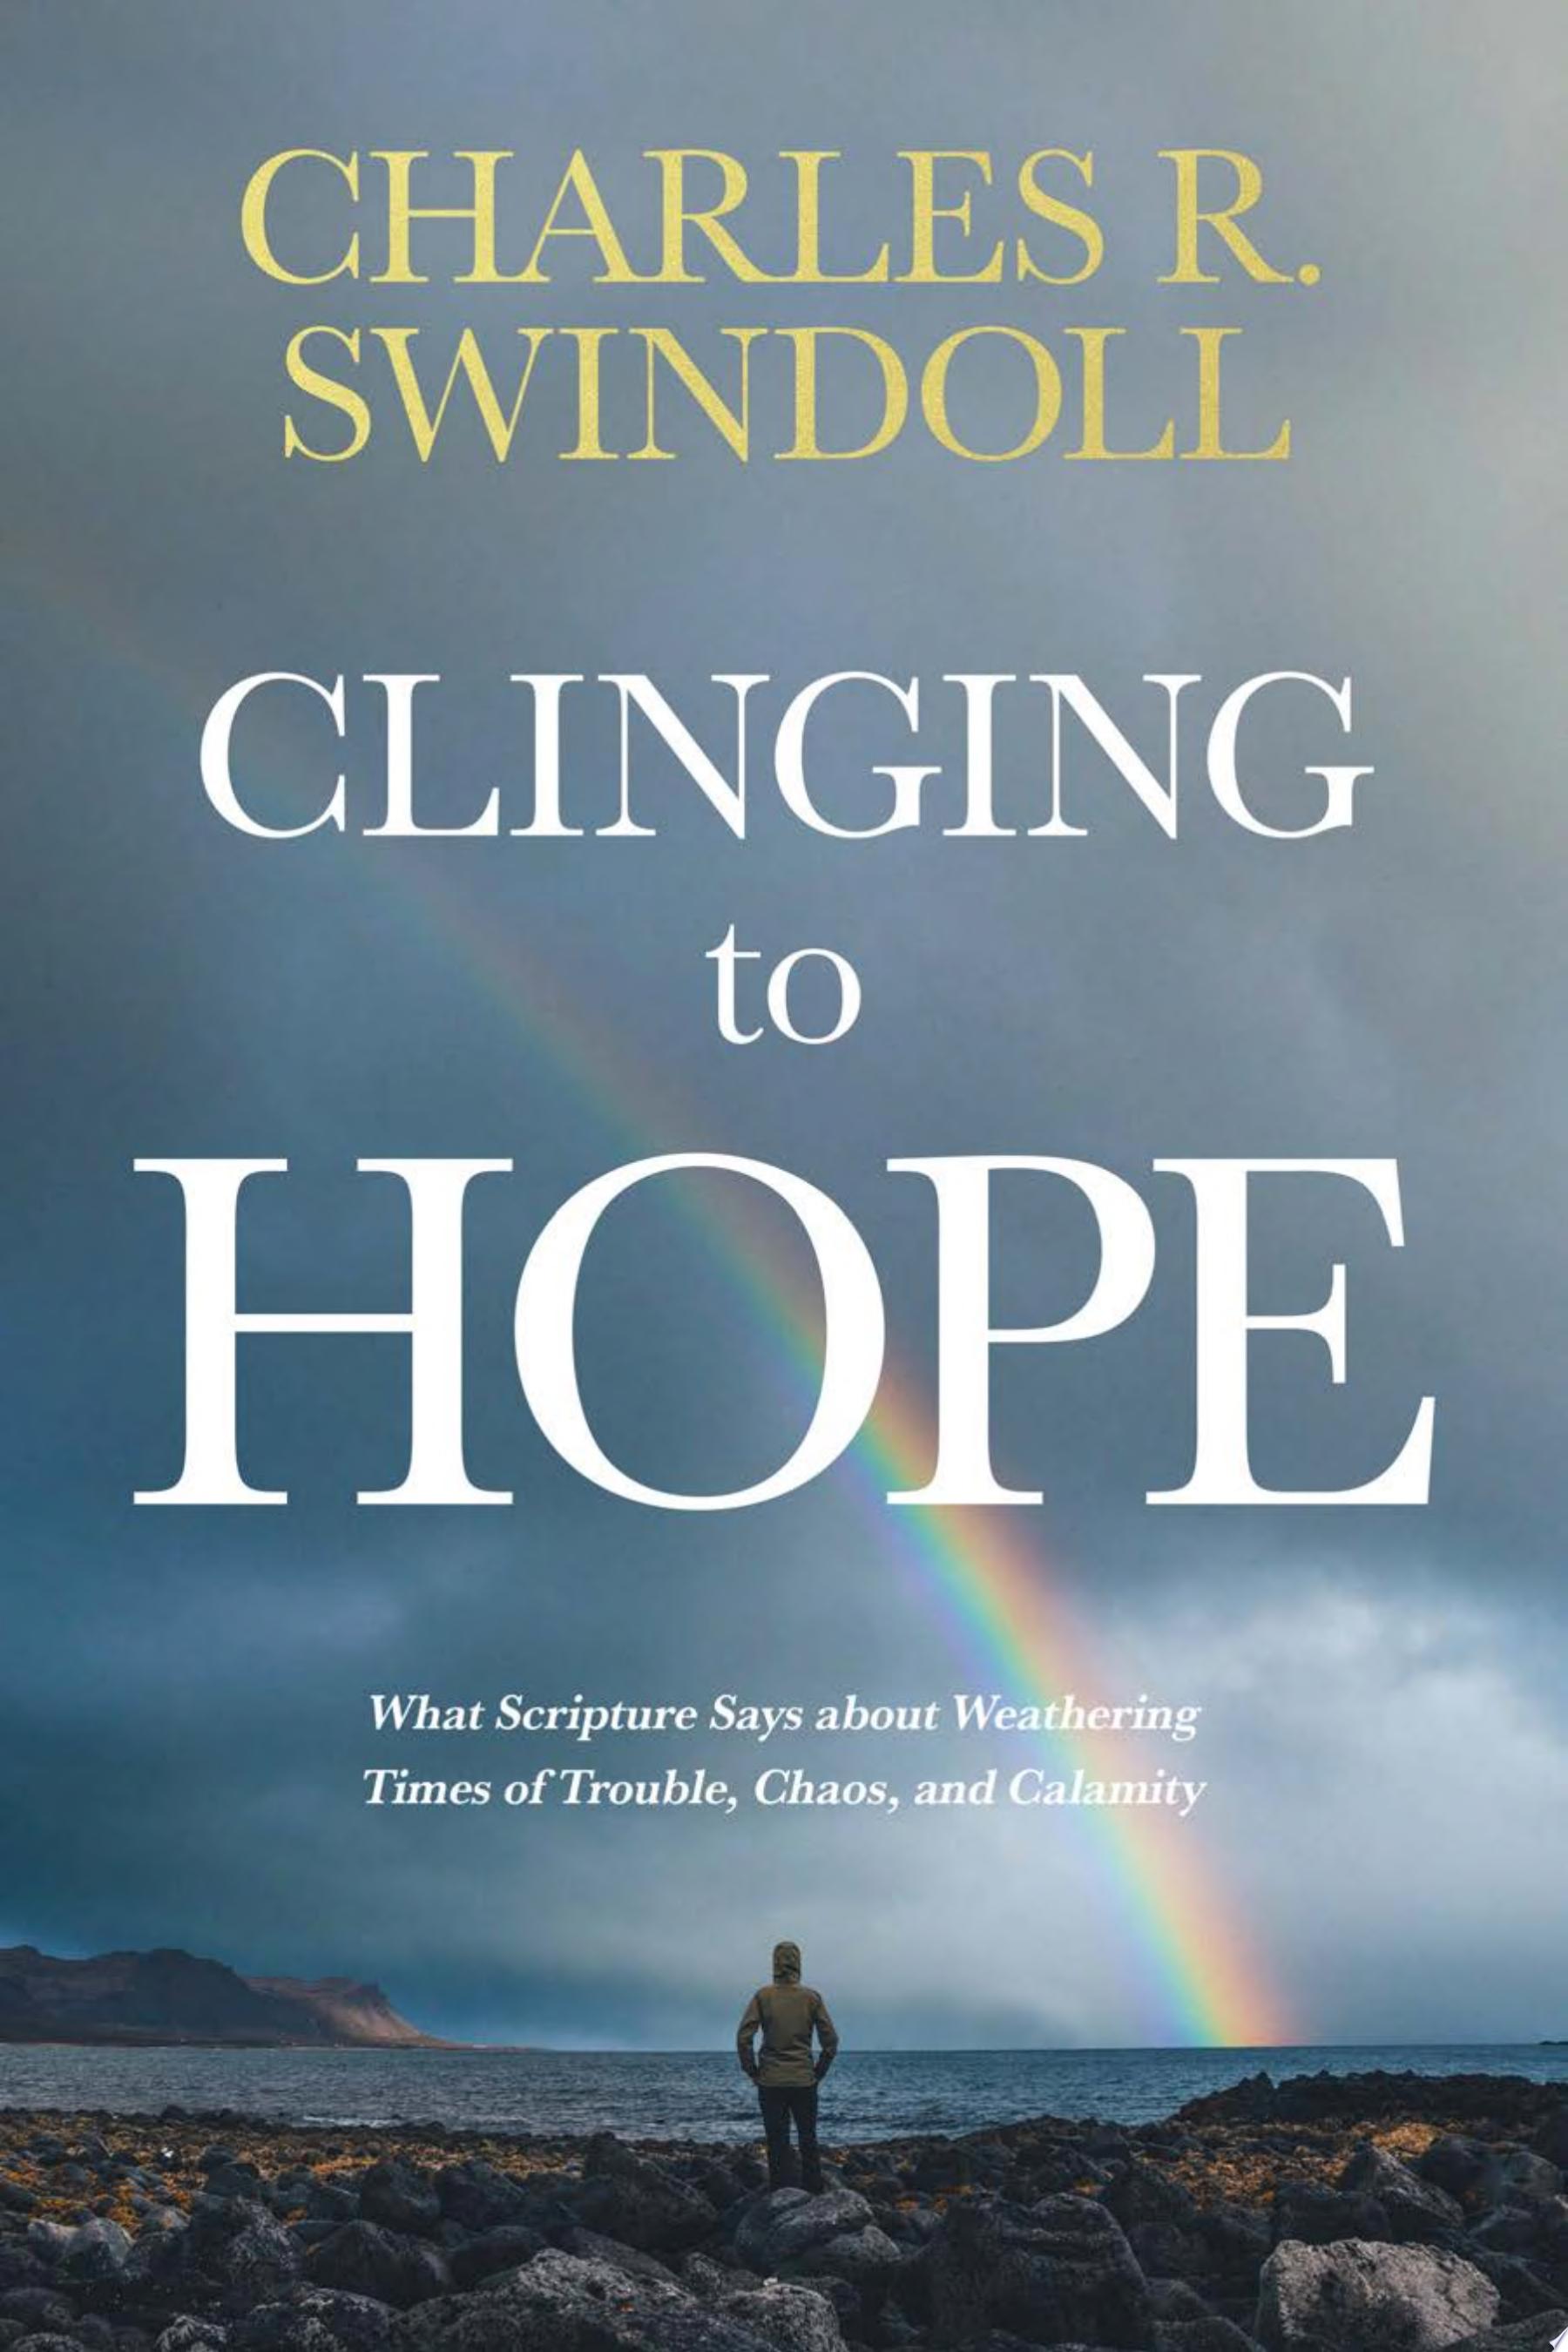 Image for "Clinging to Hope"